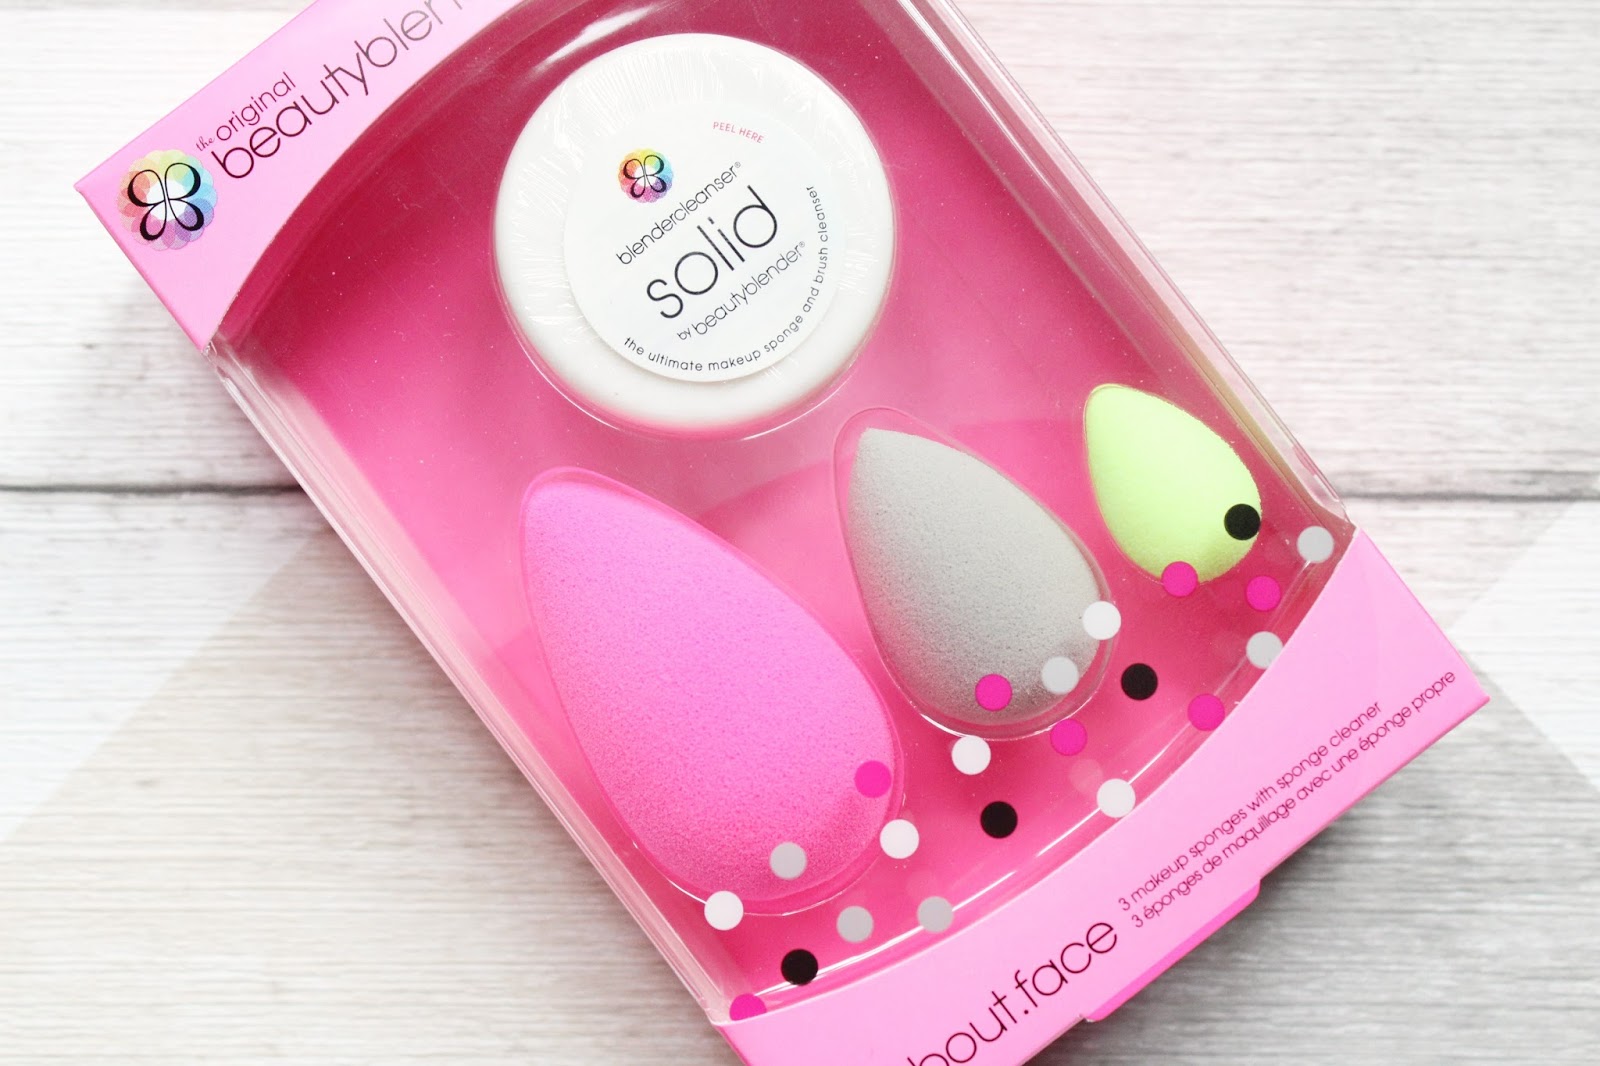 Beauty Blender All About Face Collection